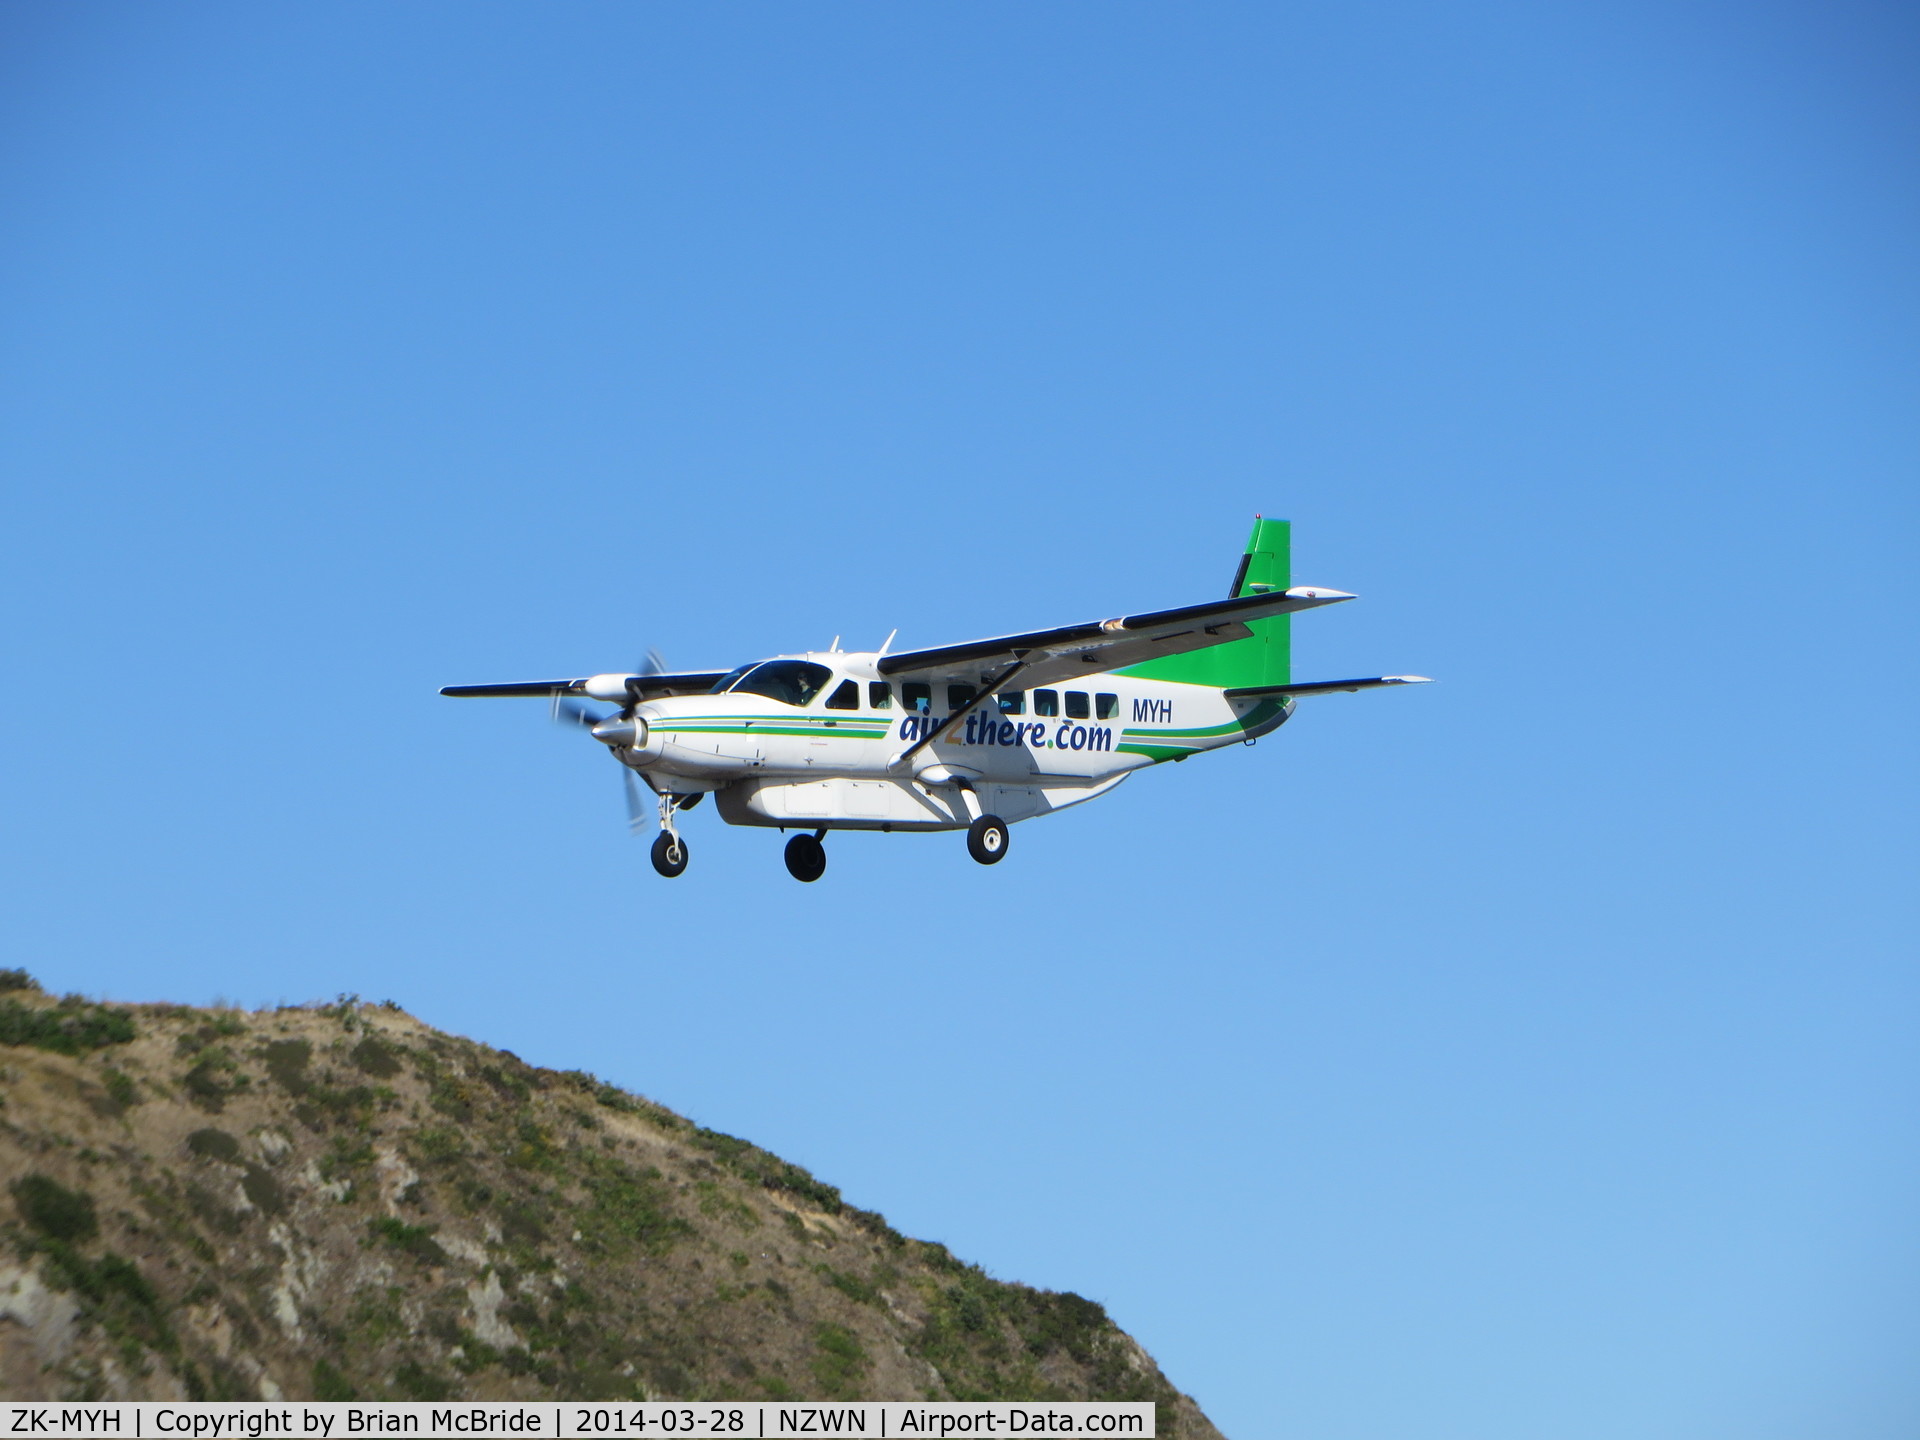 ZK-MYH, 1997 Cessna 208B Grand Caravan C/N 208B0604, air2there. Cessna 208B Grand Caravan. ZK-MYH cn 208B0604. Wellington - International (WLG NZWN). Image © Brian McBride. 28 March 2014